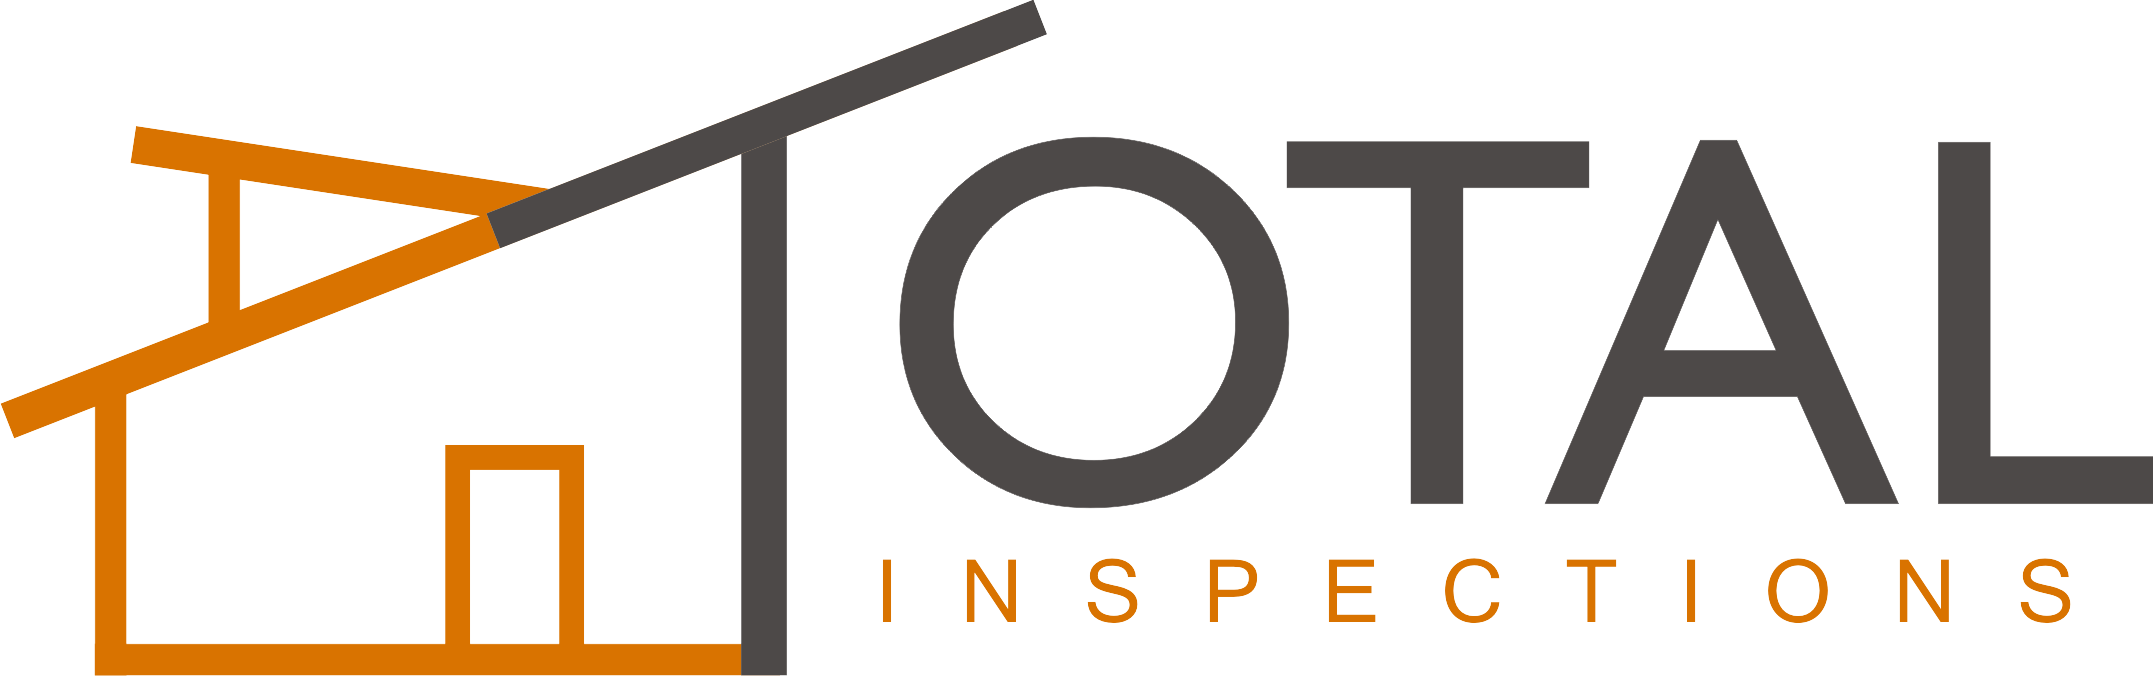 Inspection Logo - Total Home Inspection. Arizona Home Inspector